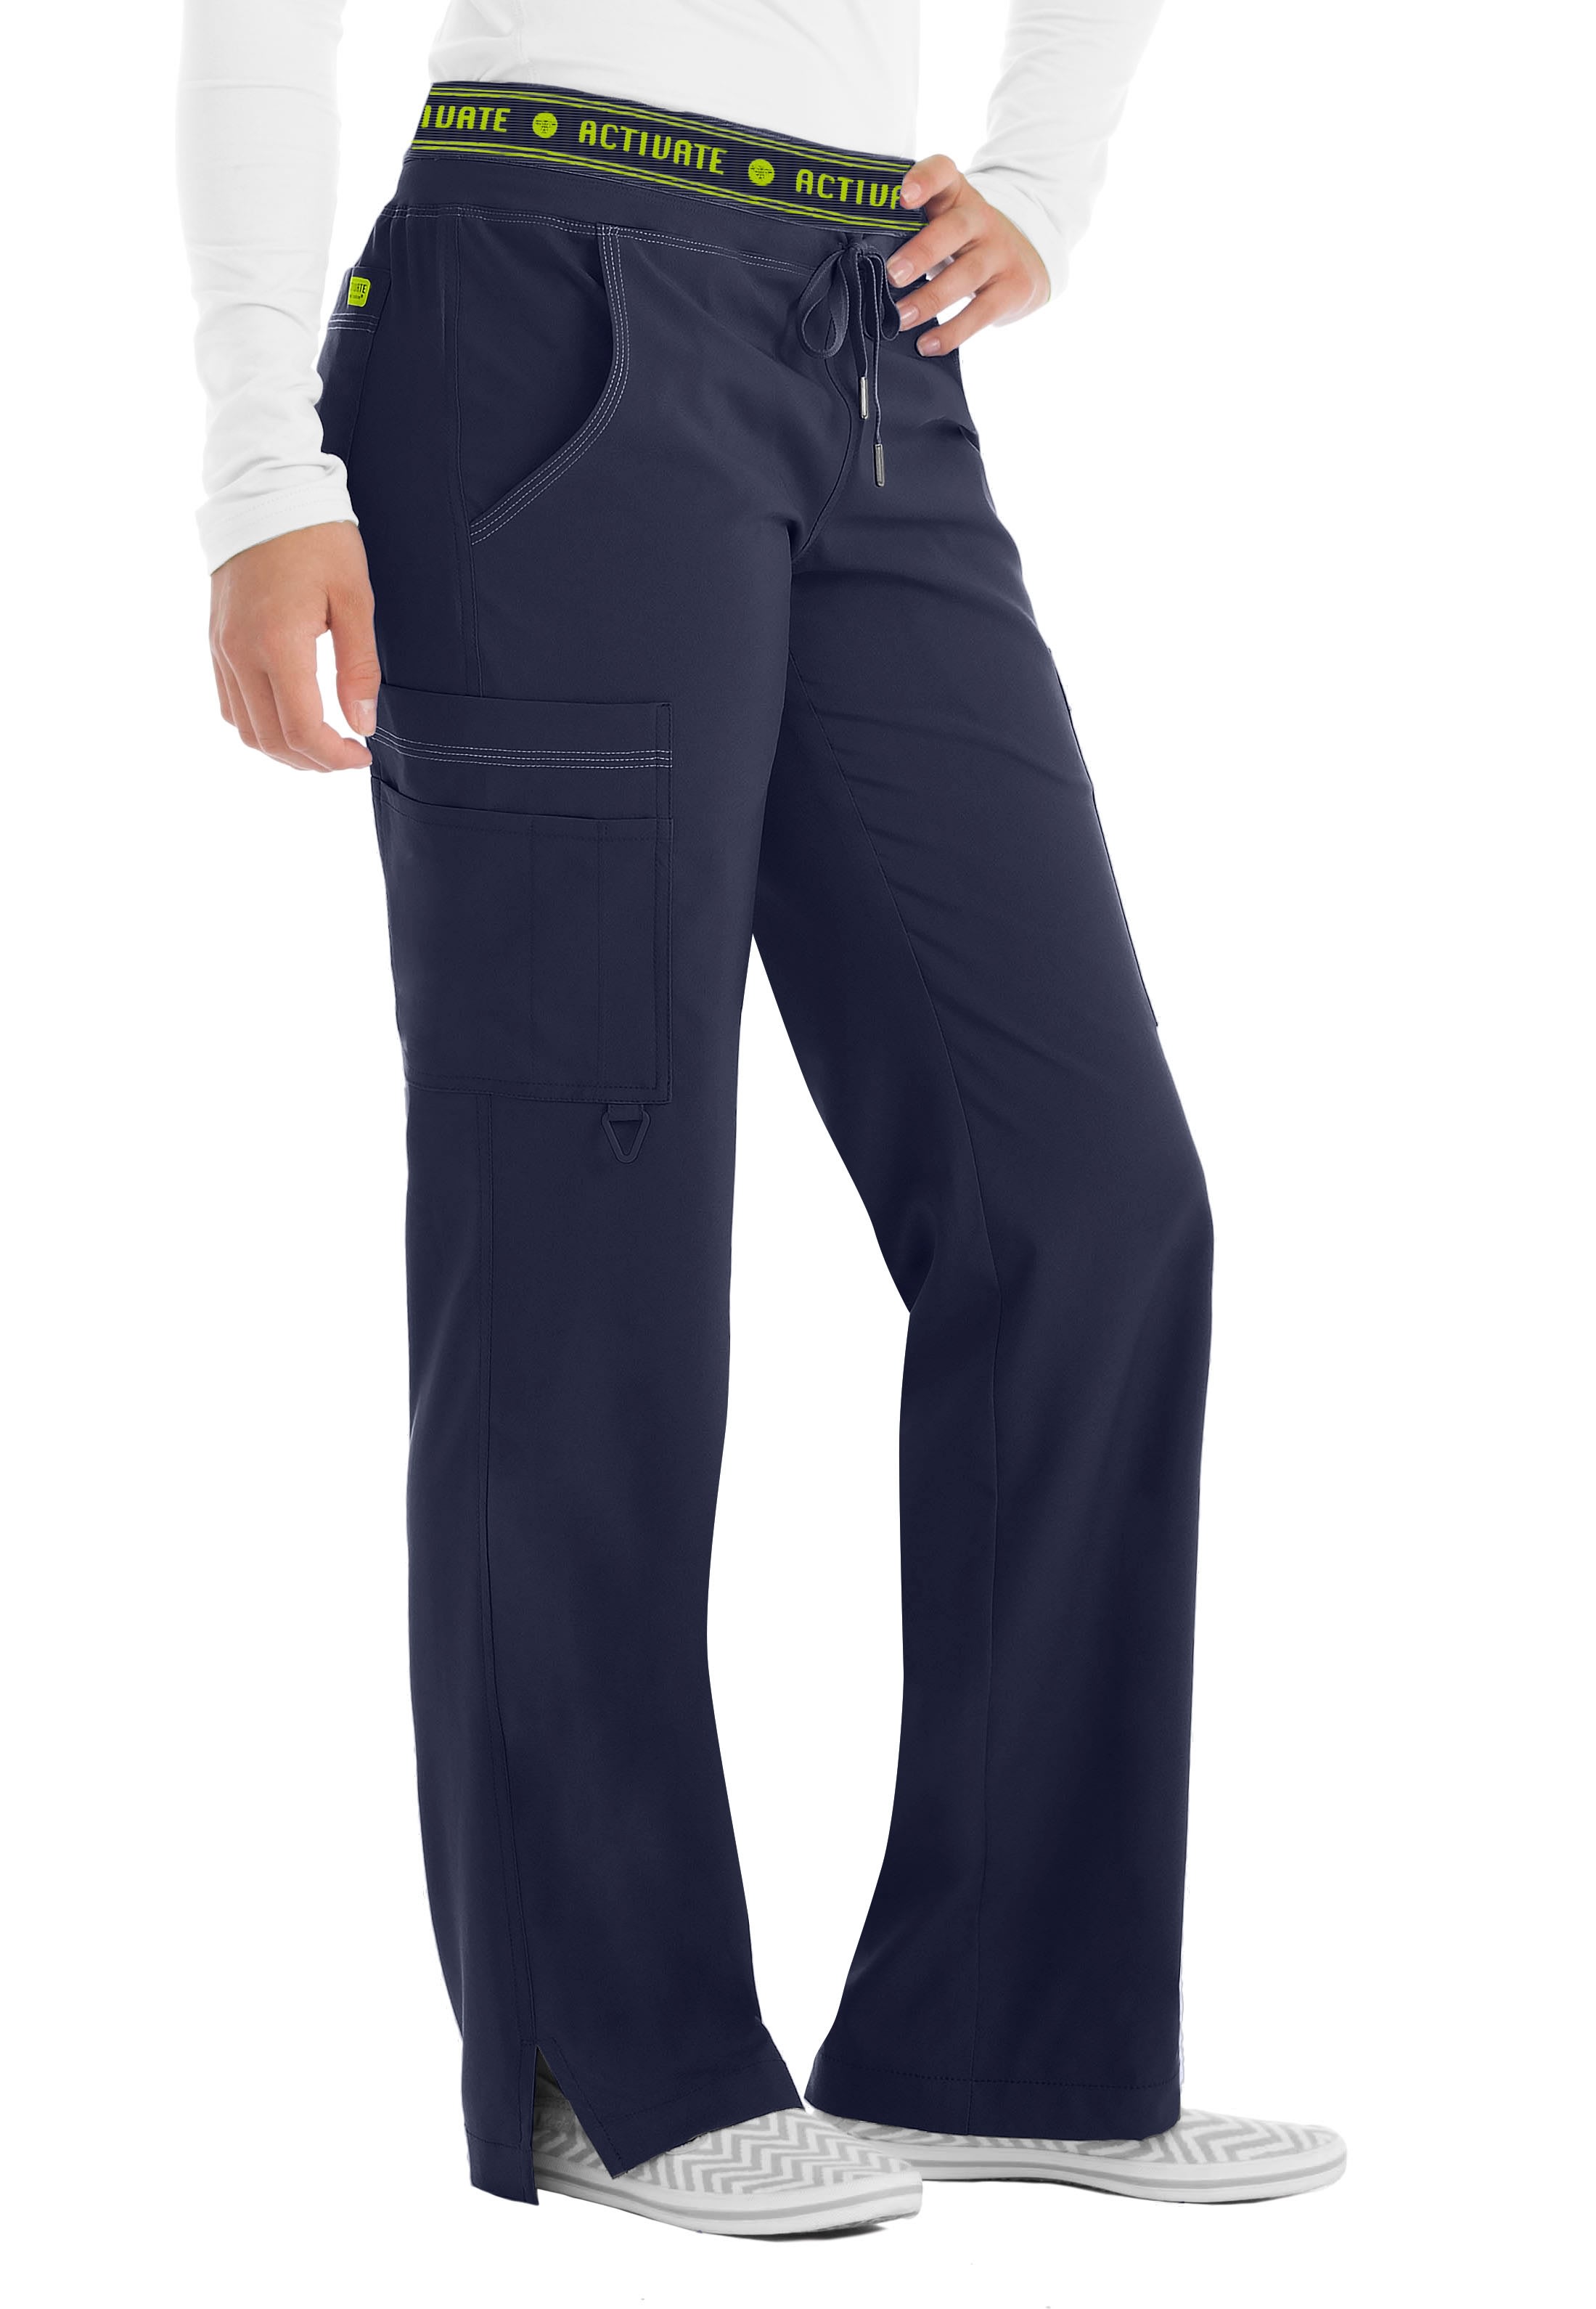 Med Couture Activate Flow Logo Waist Scrub Pants | Scrubs & Beyond